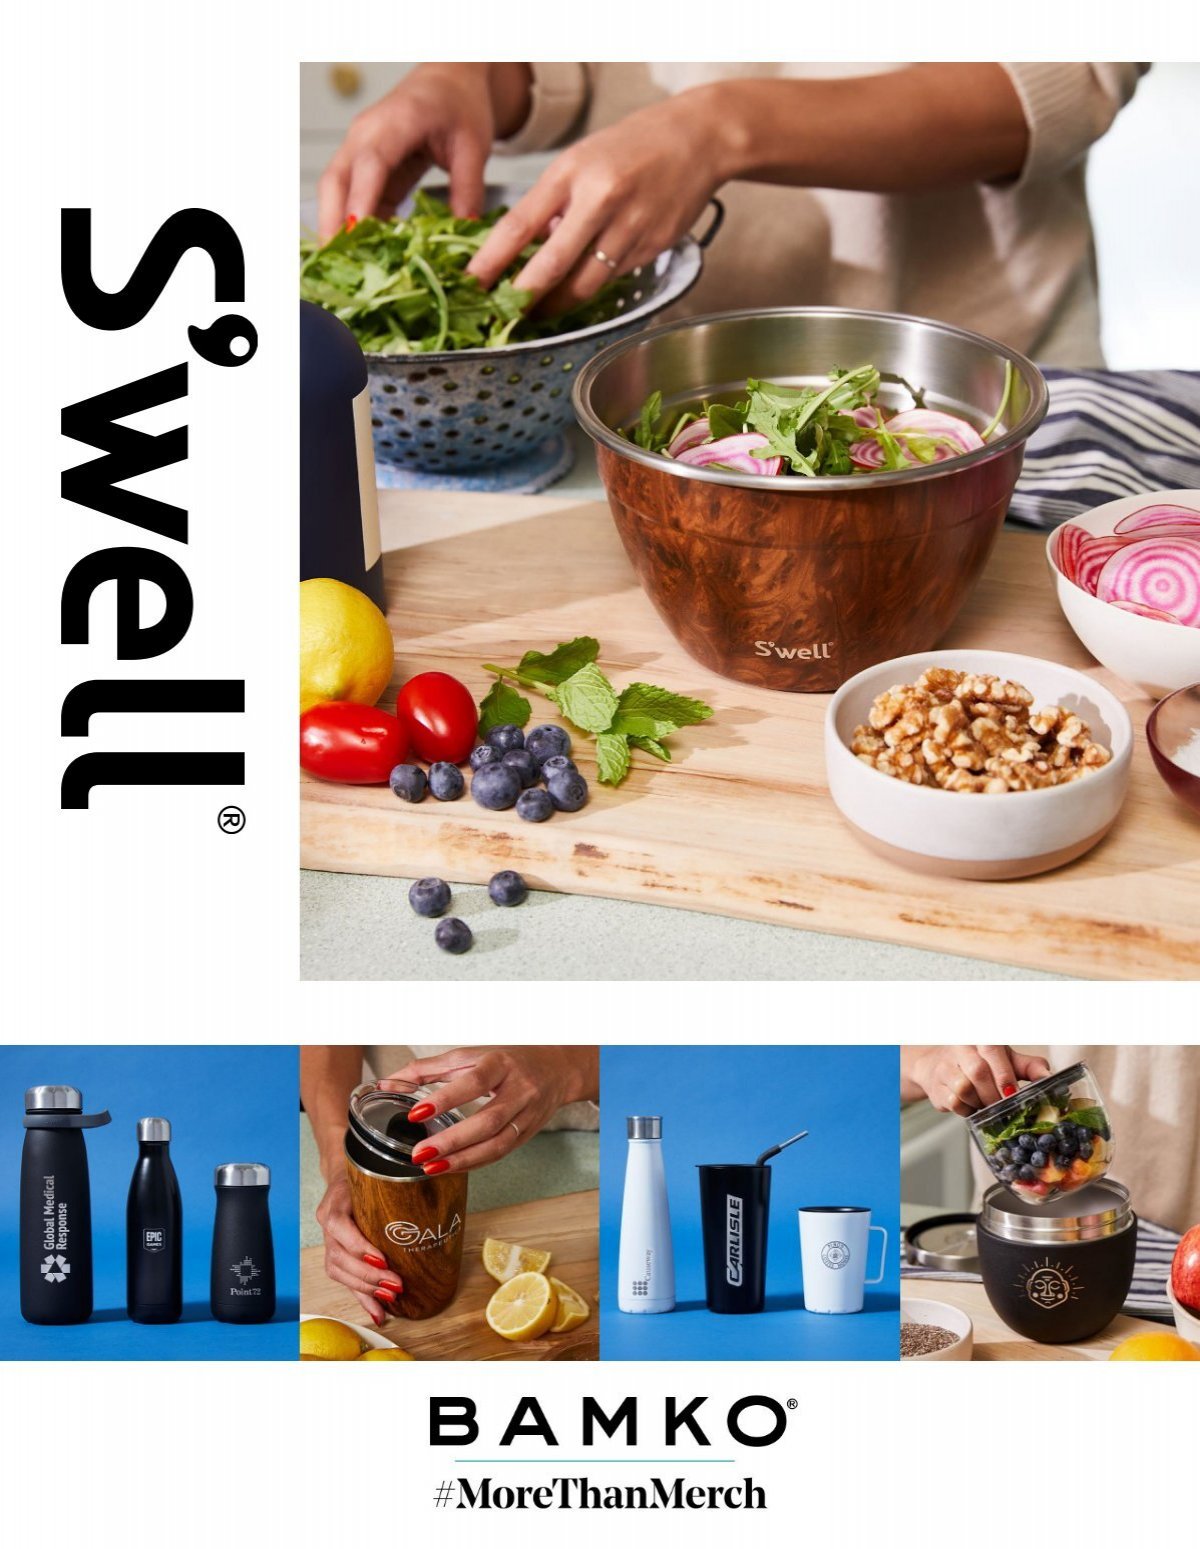  S'well Stainless Steel Salad Bowl Kit - 64oz, Teakwood - Comes  with 2oz Condiment Container and Removable Tray for Organization -  Leak-Proof, Easy to Clean, Dishwasher Safe : Sports & Outdoors